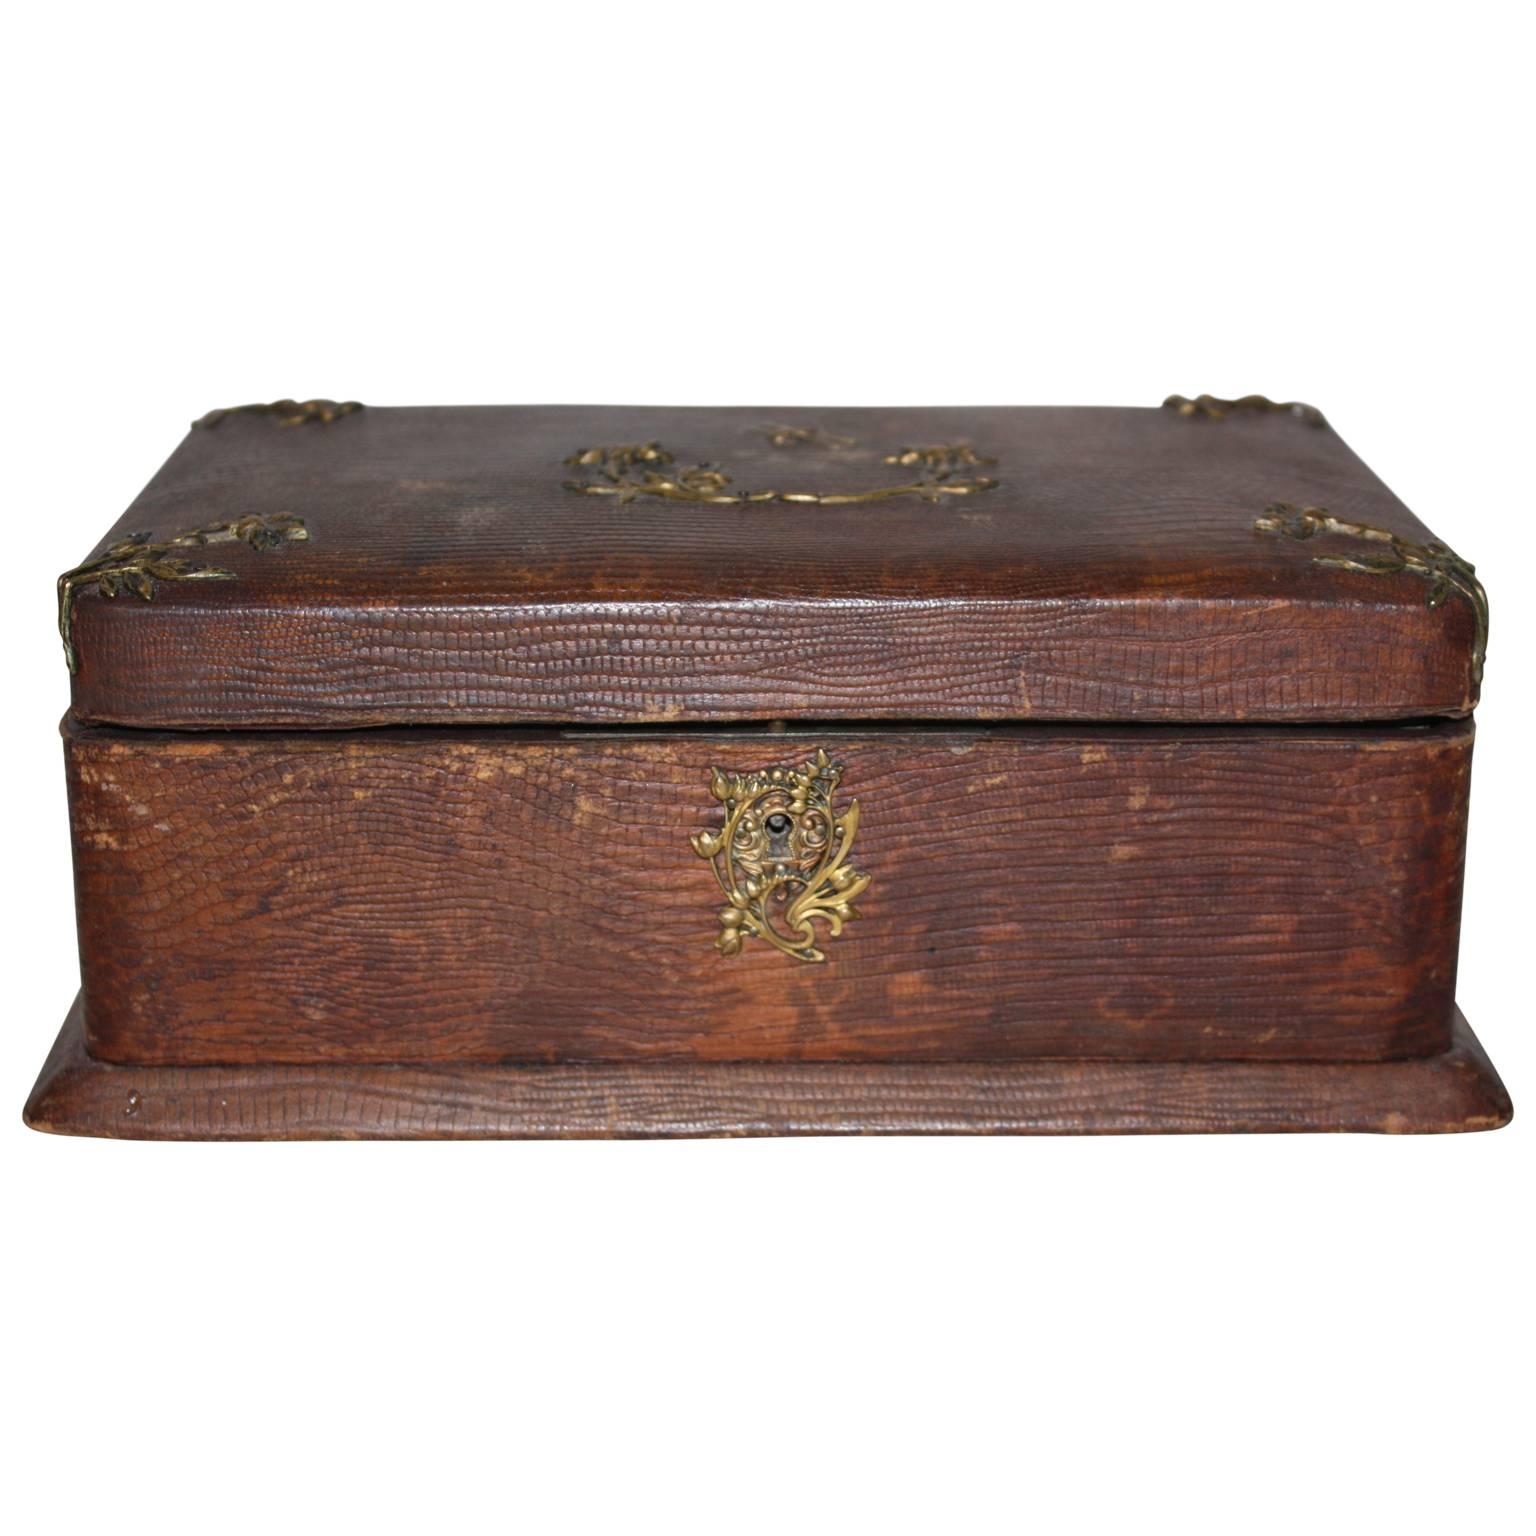 Beautiful early 20th century leather jewellery box with brass dragonflyes and flowers.